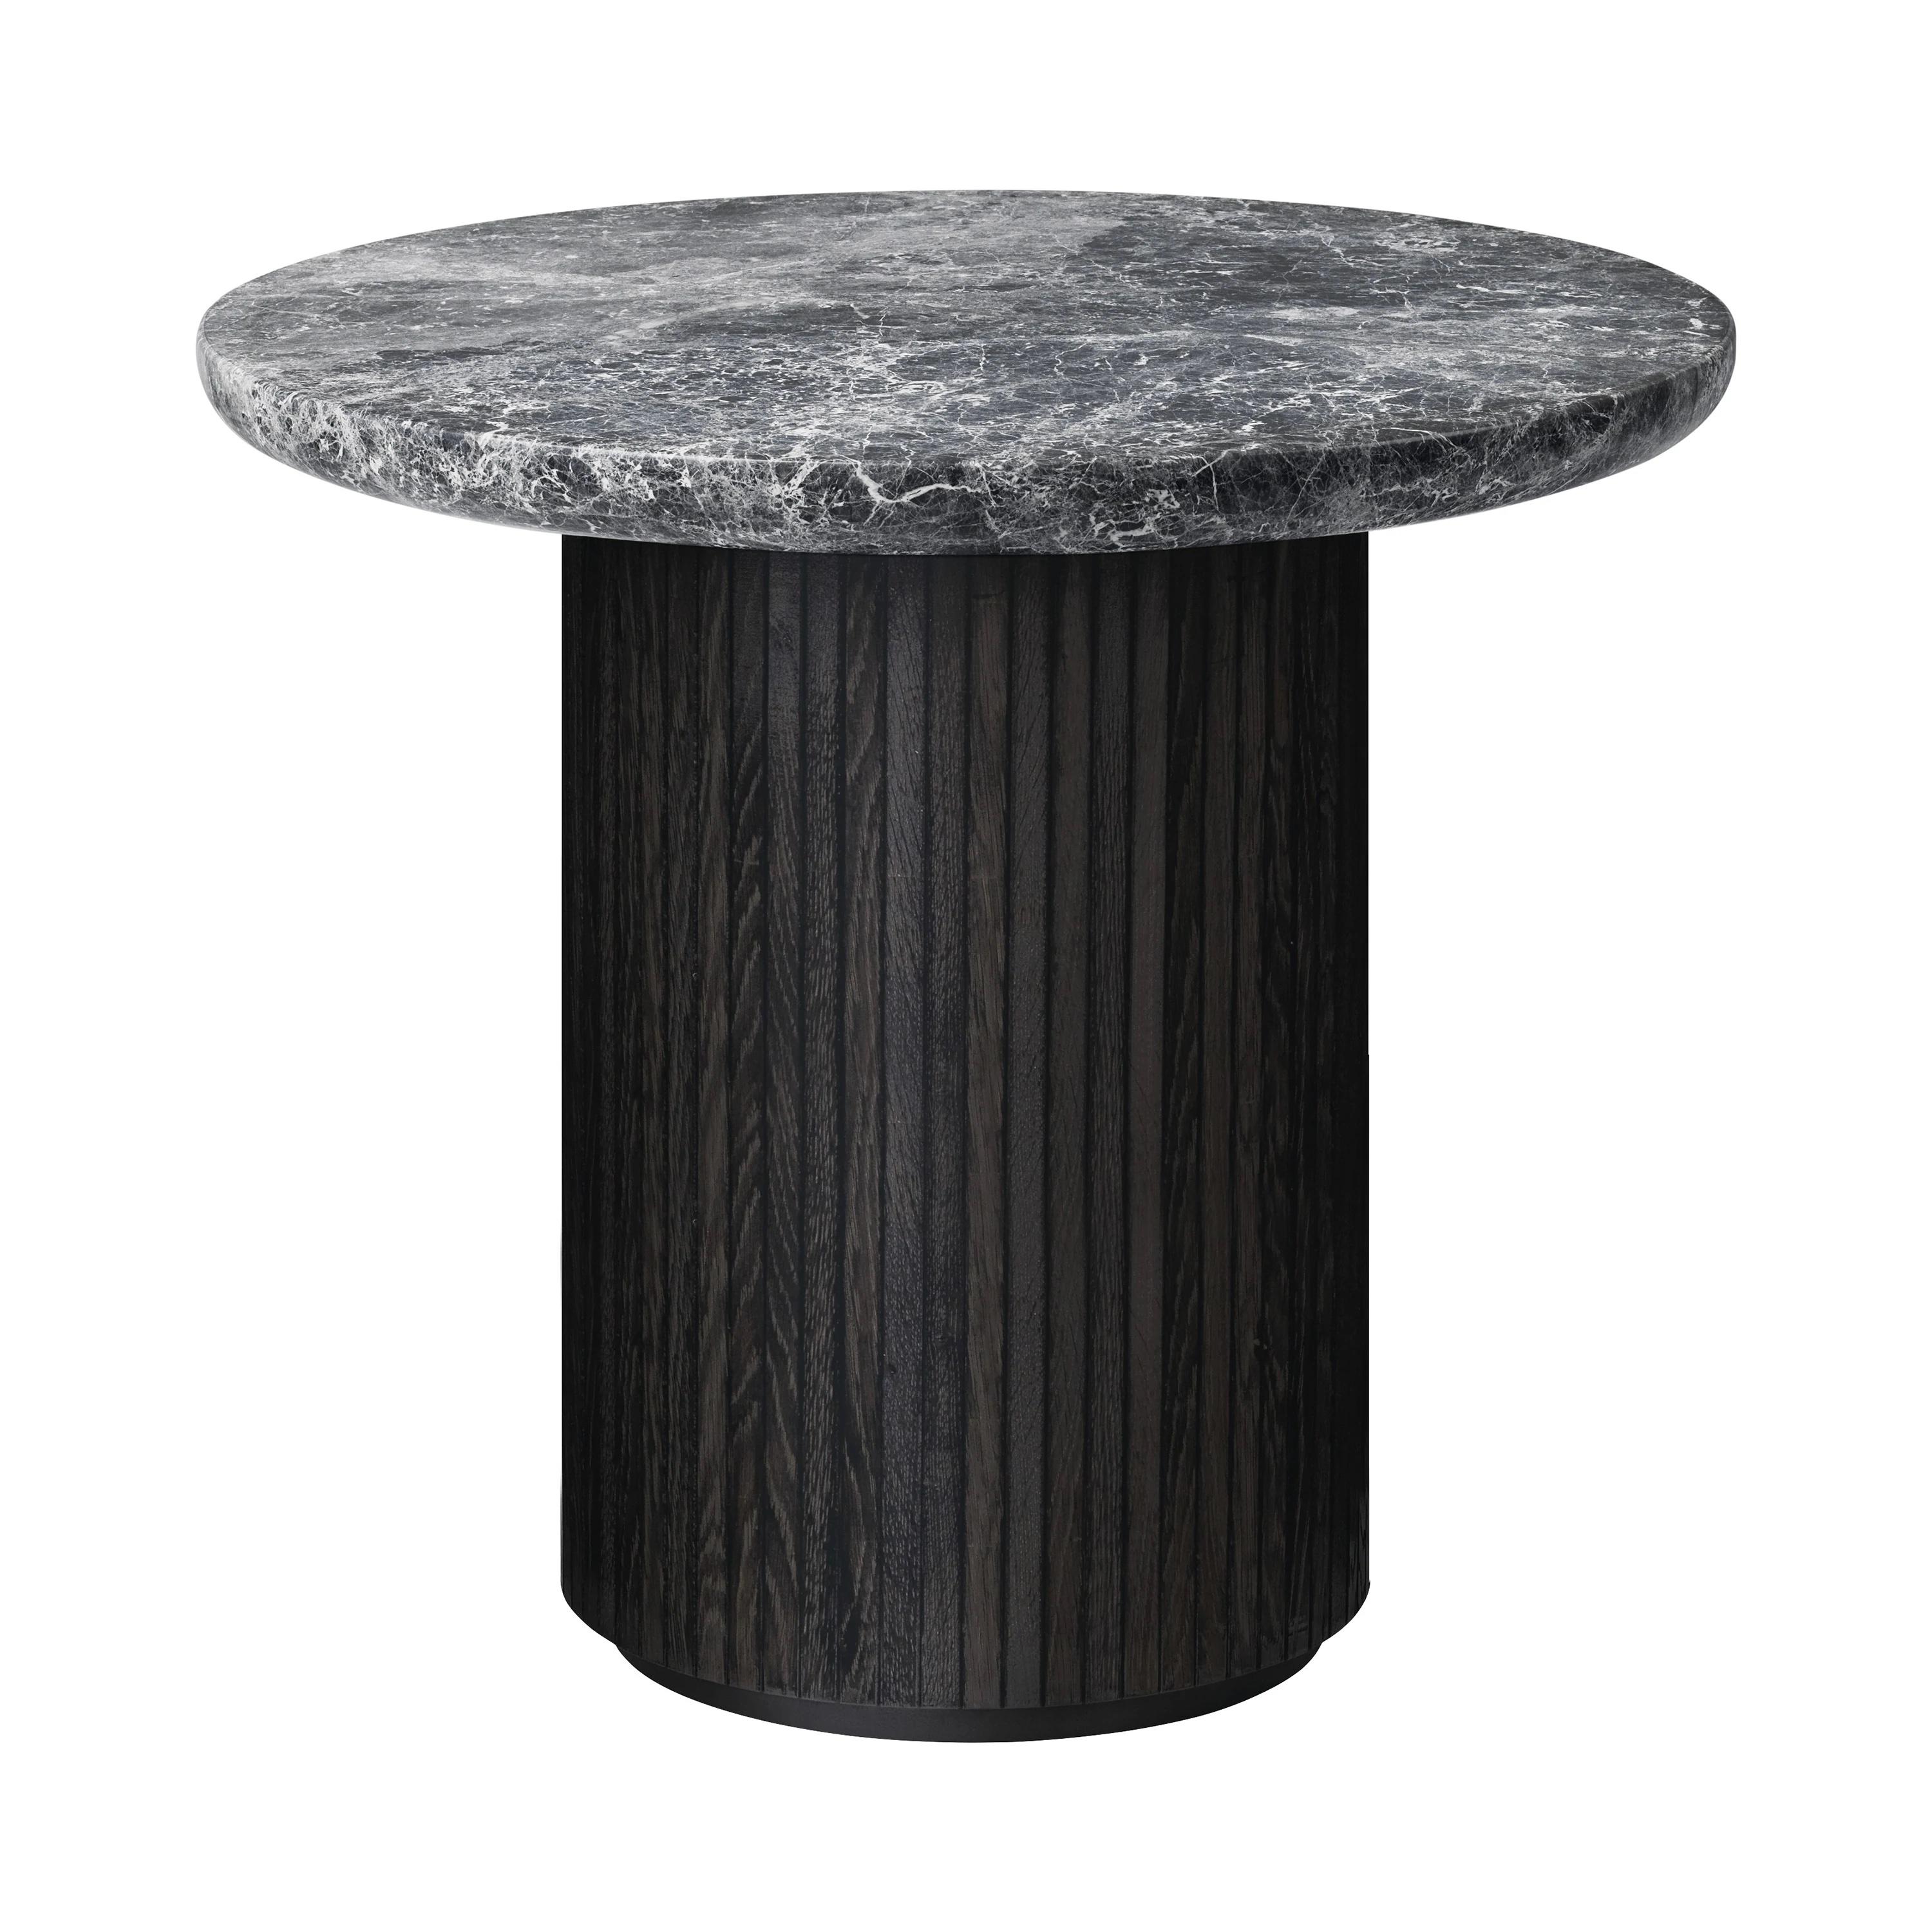 Space Copenhagen is the designer behind the classic Moon Dining Table; a series of organic rounded tables for both domestic and public spaces. The interplay between the beautiful solid oak table top and the smooth half – or full moon shaped base,